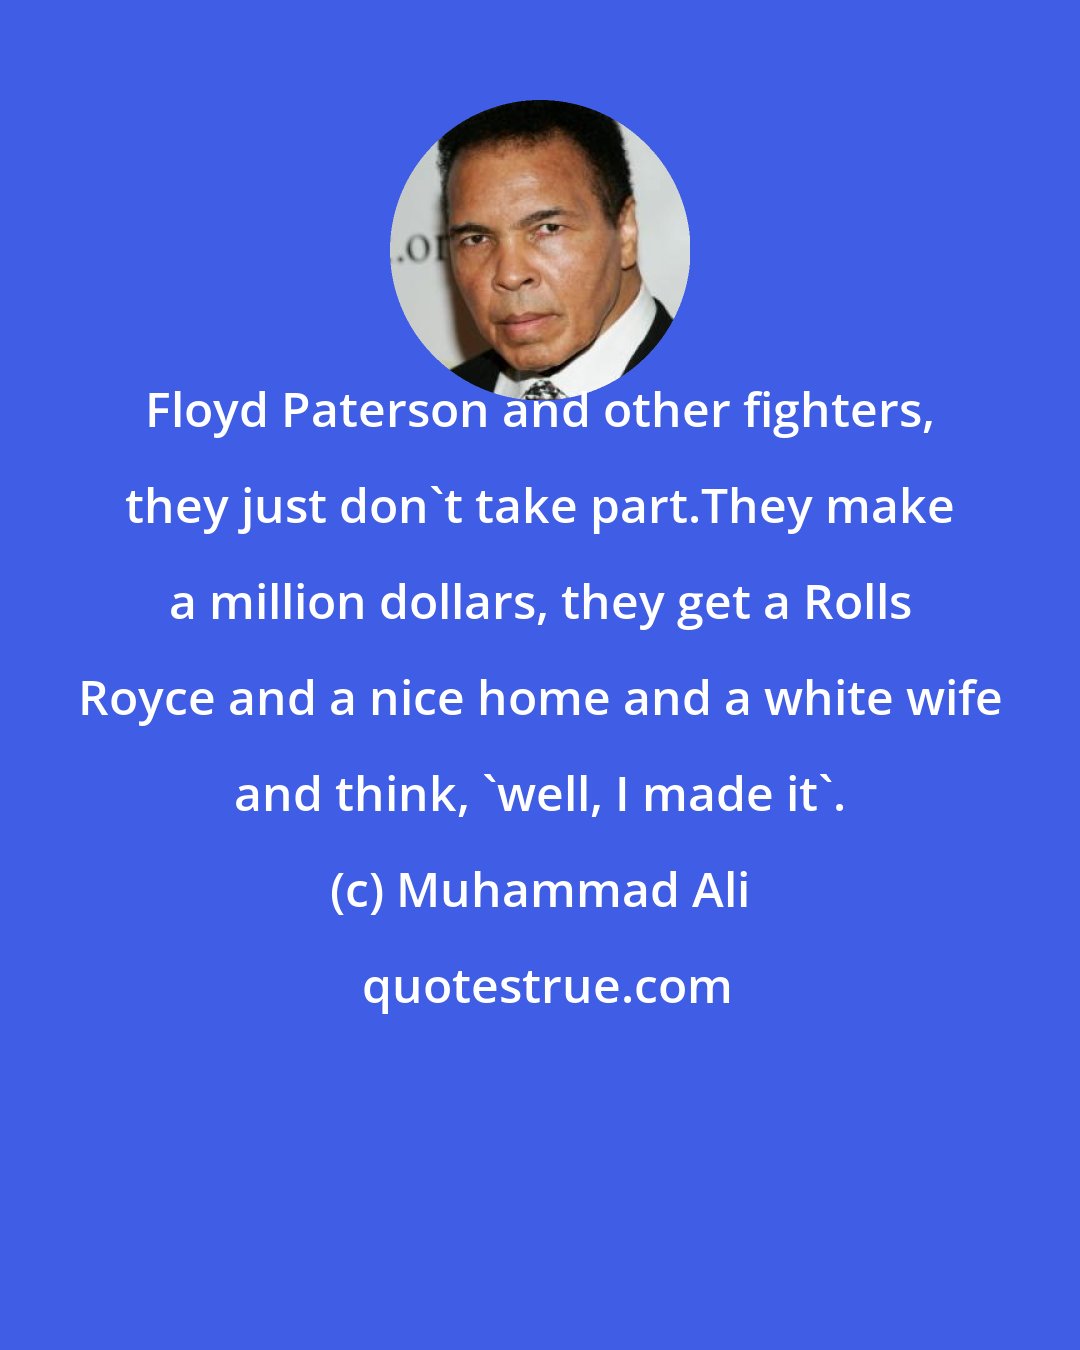 Muhammad Ali: Floyd Paterson and other fighters, they just don't take part.They make a million dollars, they get a Rolls Royce and a nice home and a white wife and think, 'well, I made it'.